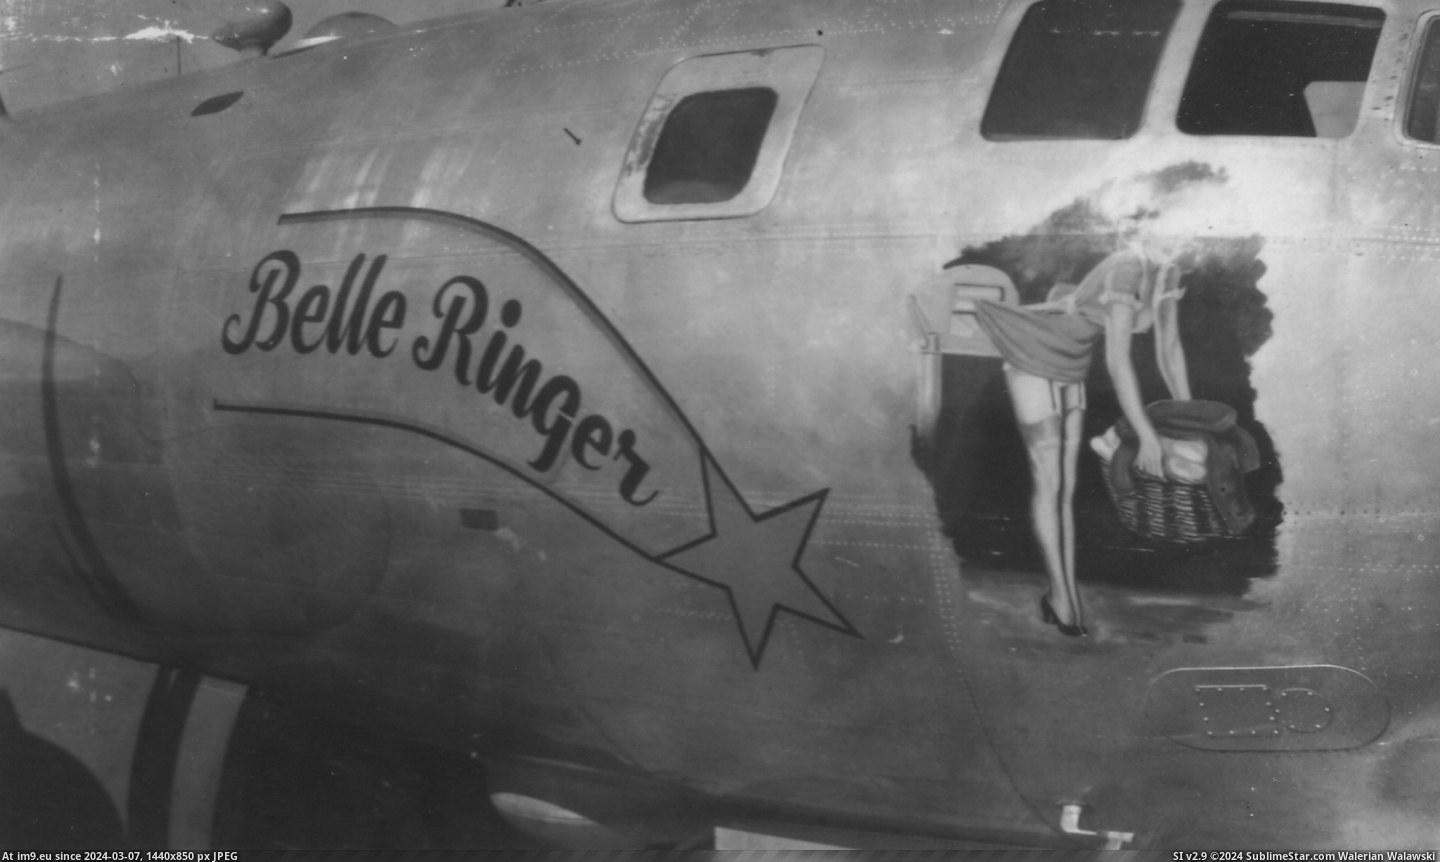 #Art #Posting #Nose #Ww2 #Galore #Guess #Grandfather [Pics] Guess I can get away with posting my Grandfather's pictures from WW2 today. Nose art galore. 13 Pic. (Image of album My r/PICS favs))